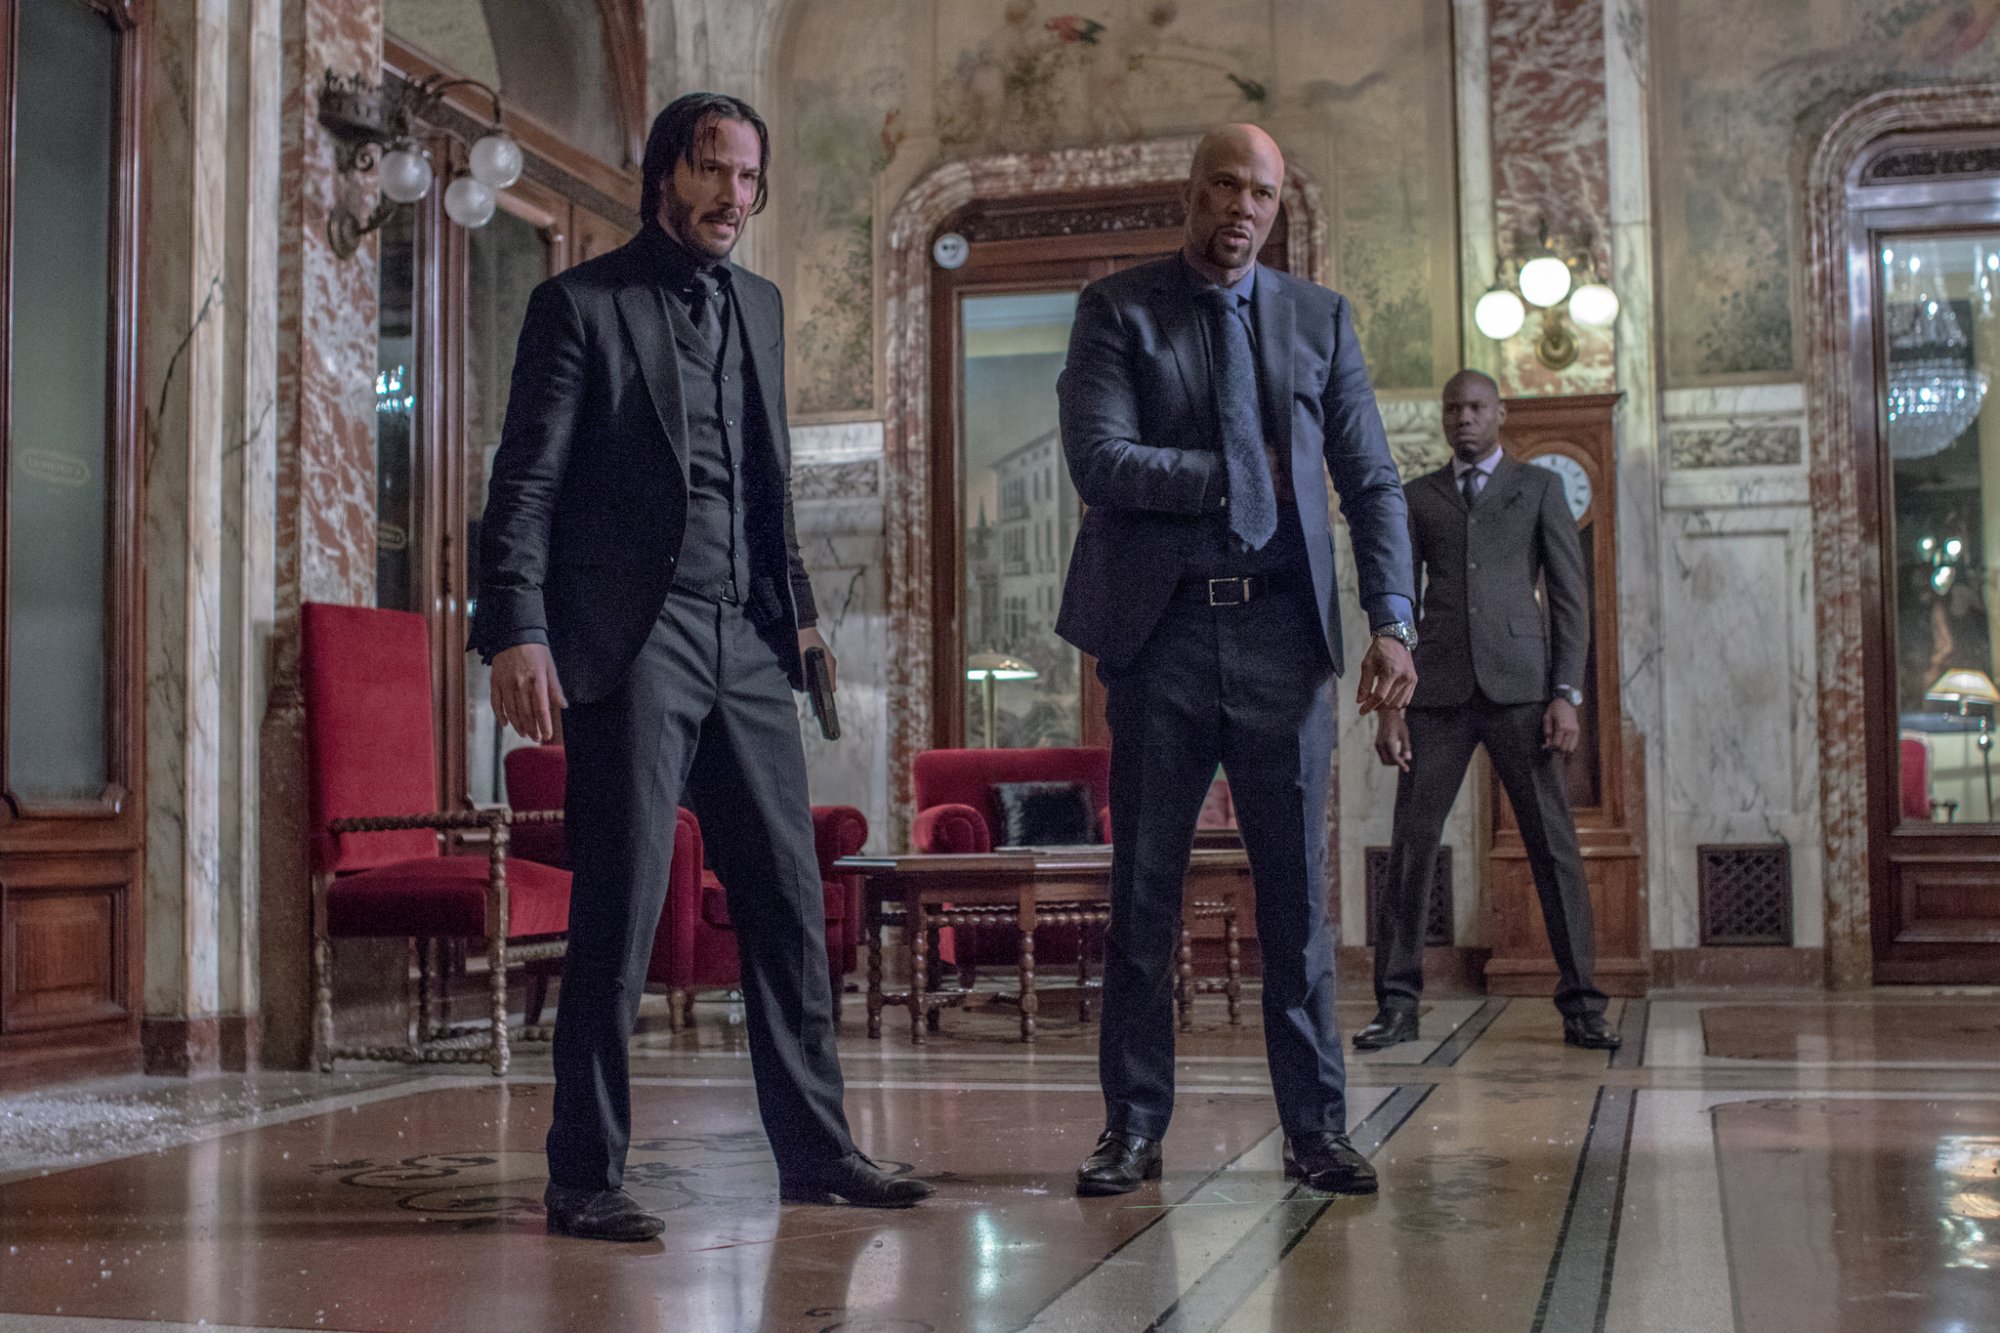 'John Wick 2' Keanu Reeves as John Wick and Common as Cassian wearing suits covered in bruises in a grand room with broken glass on the floor